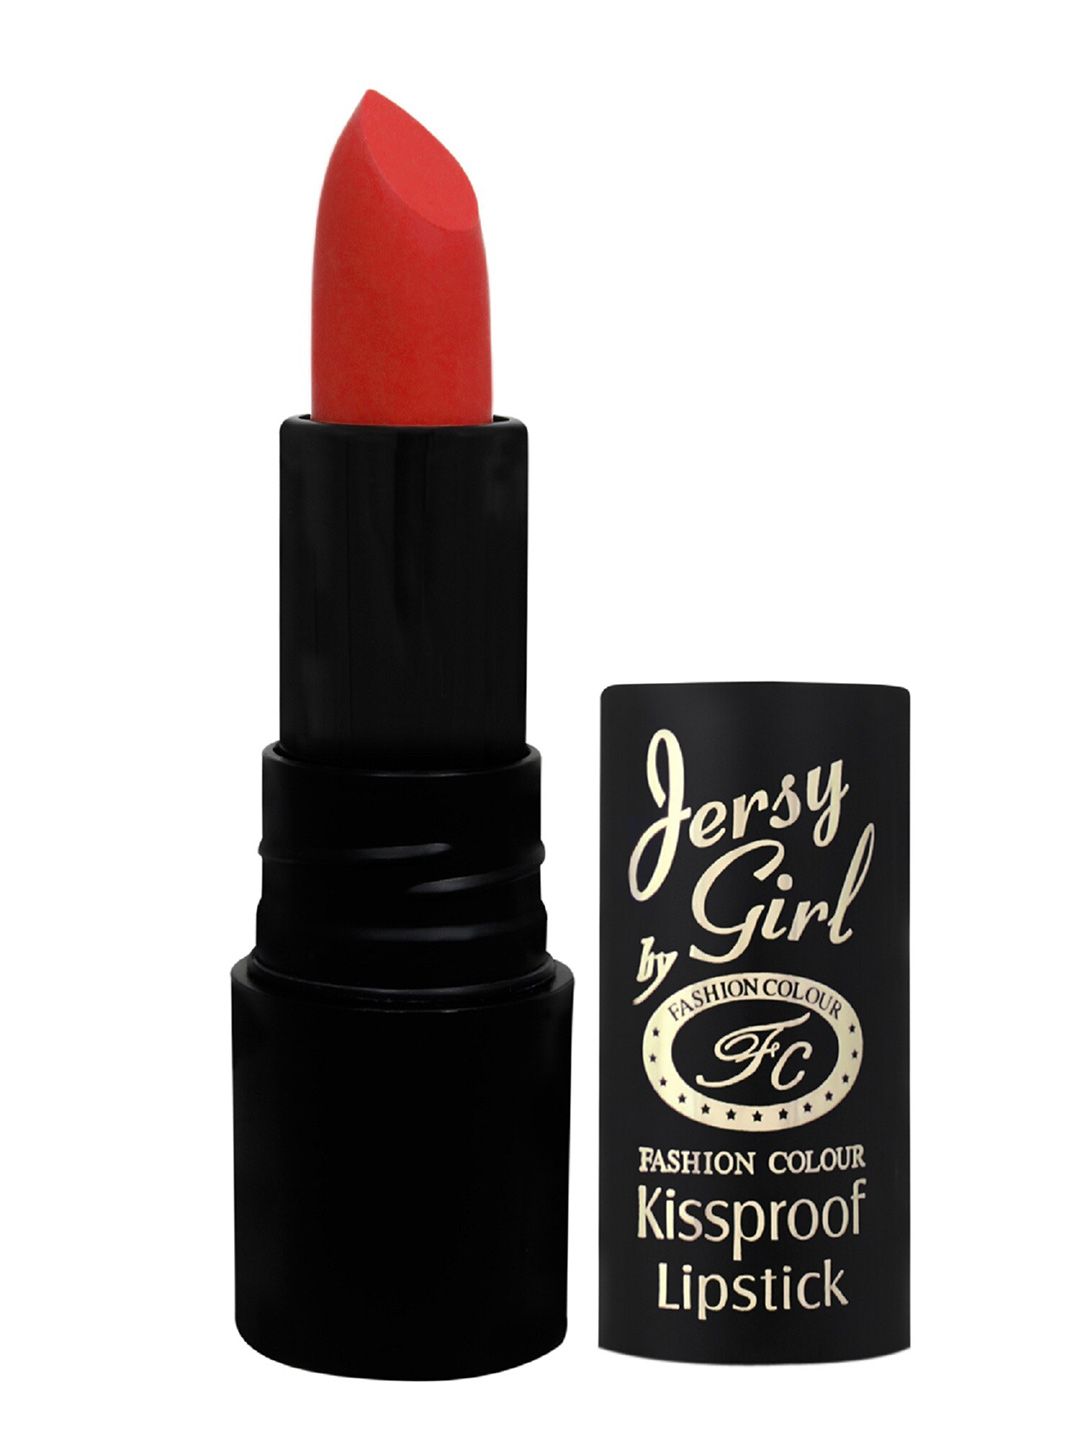 Fashion Color Jersy Girl Kiss proof Lipstick, Waterproof, Long Lasting Price in India